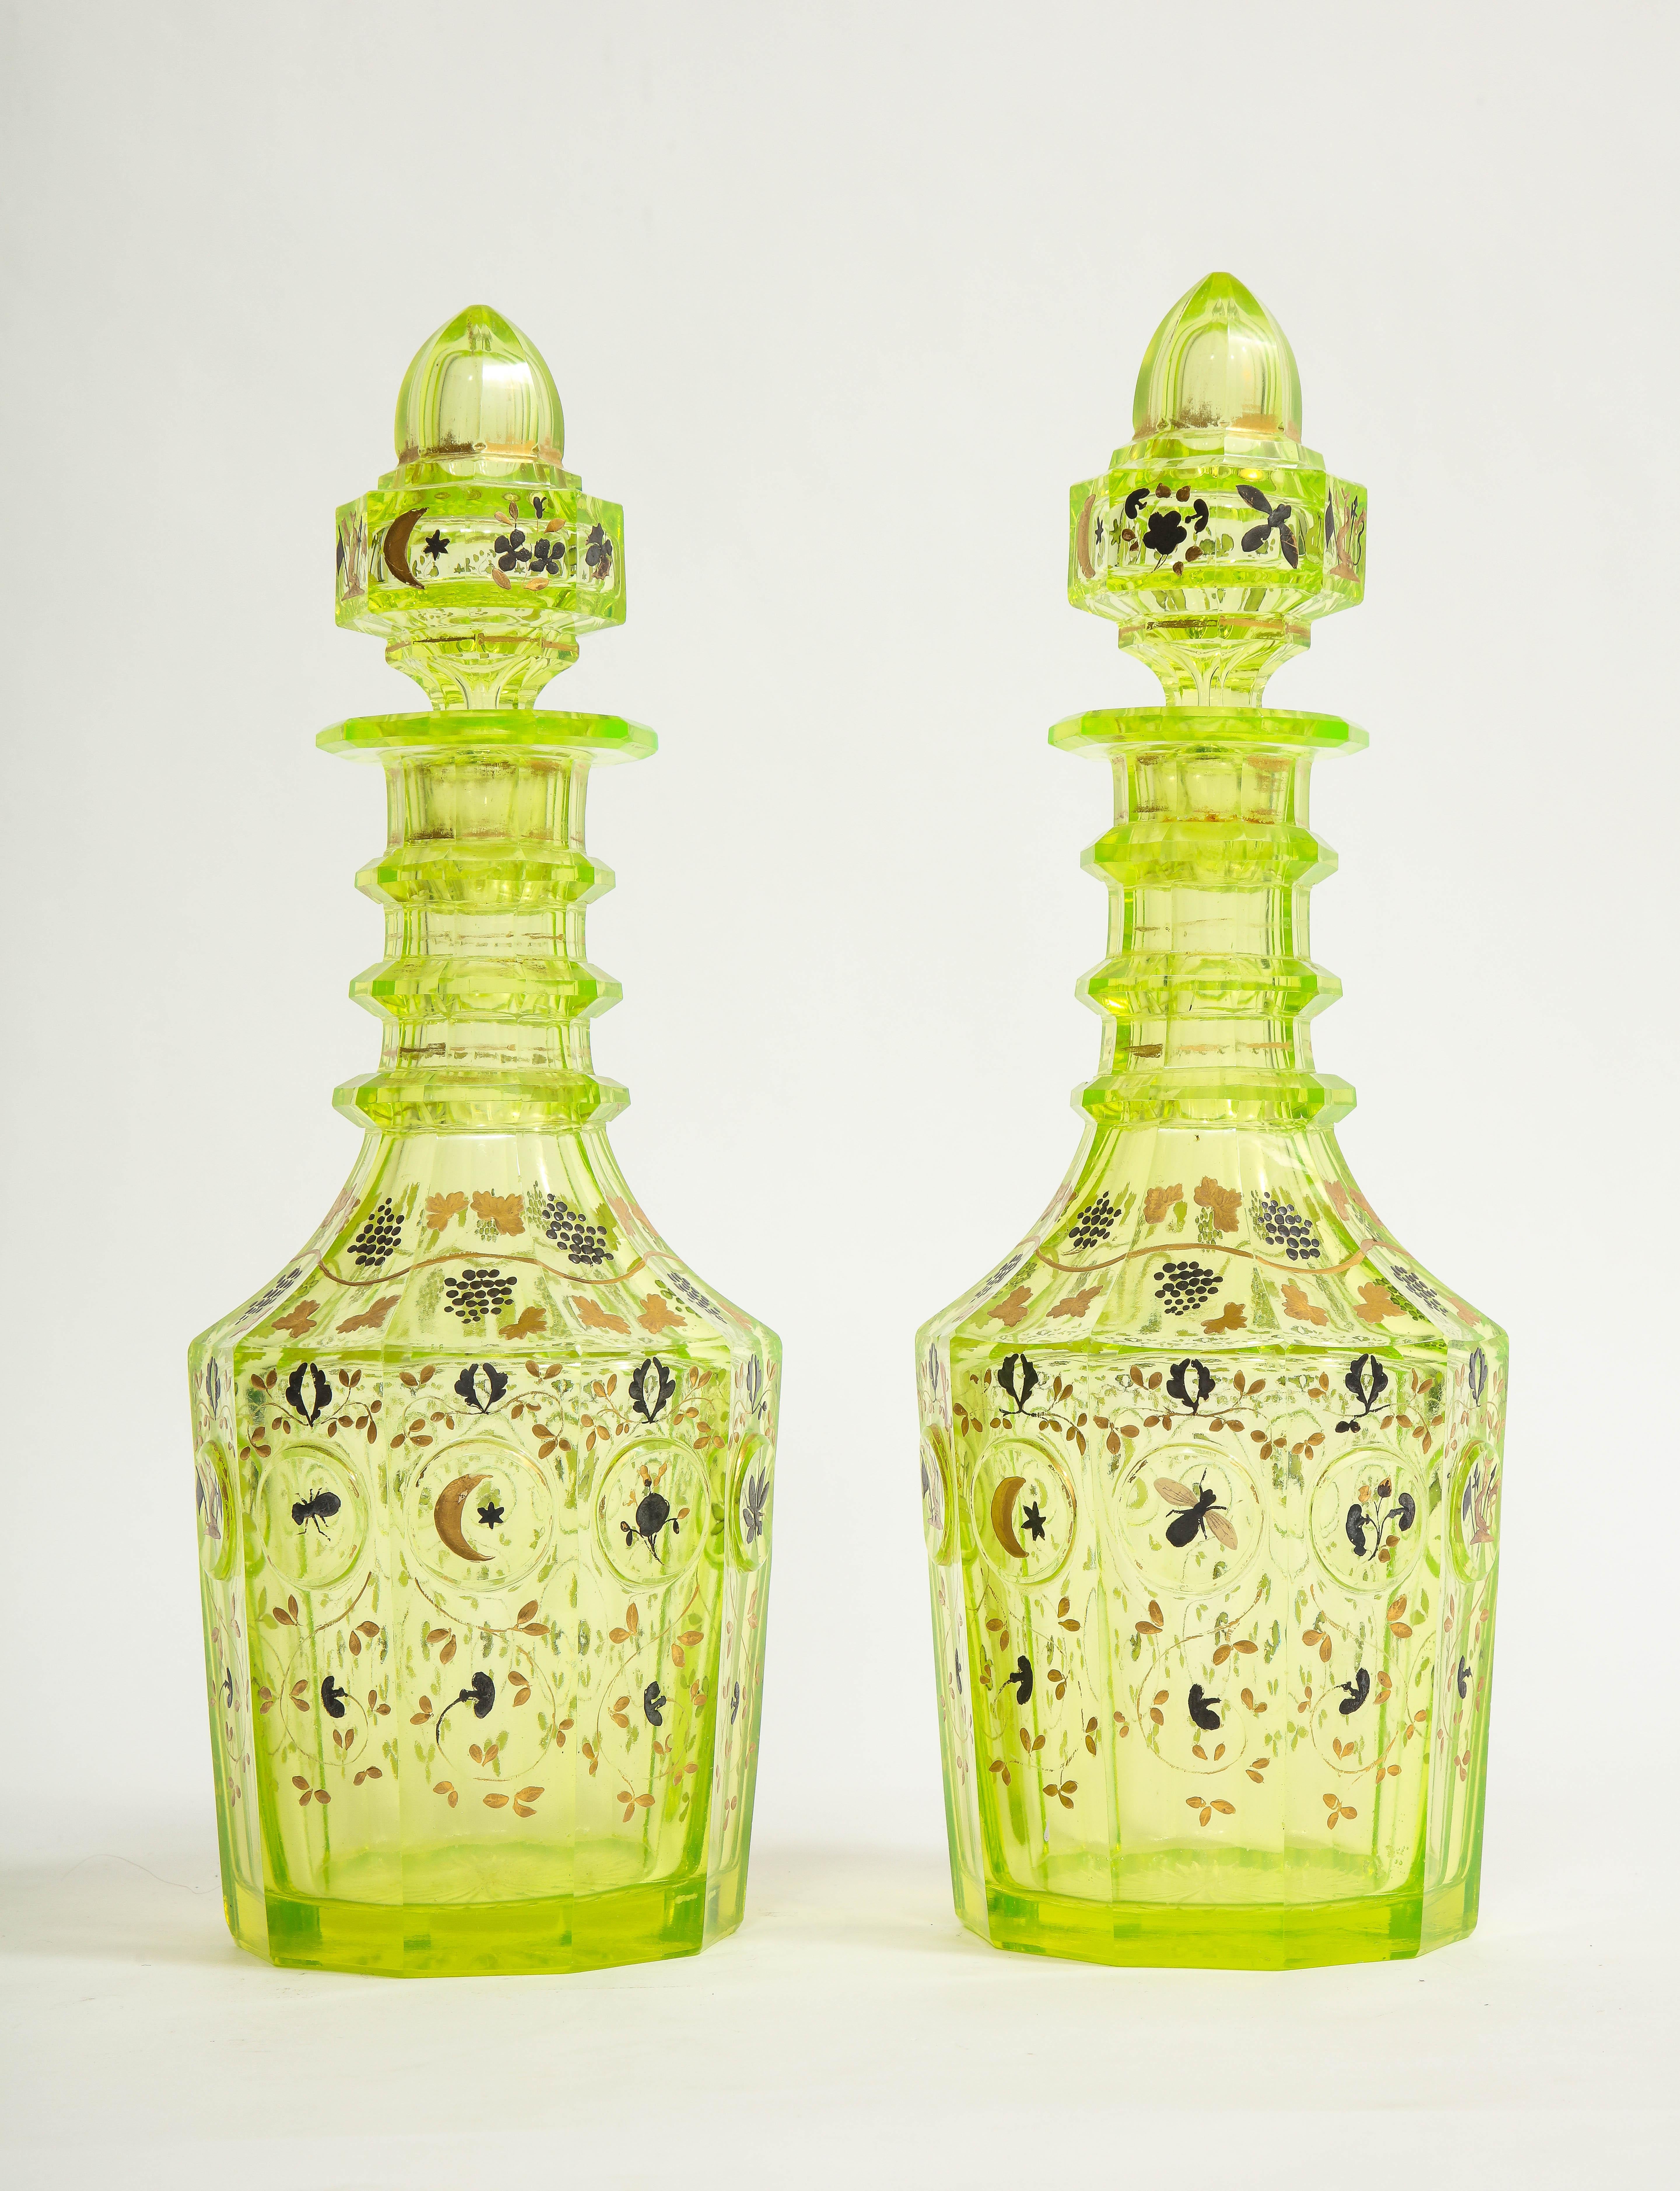 A very rare and impressive pair of 19th century Bohemian cut crystal Uranium color decanters/bottles with gold and platinum hand-painted decoration made for the Turkish/Ottoman market. Each of these decanters is made of the highest quality Bohemian